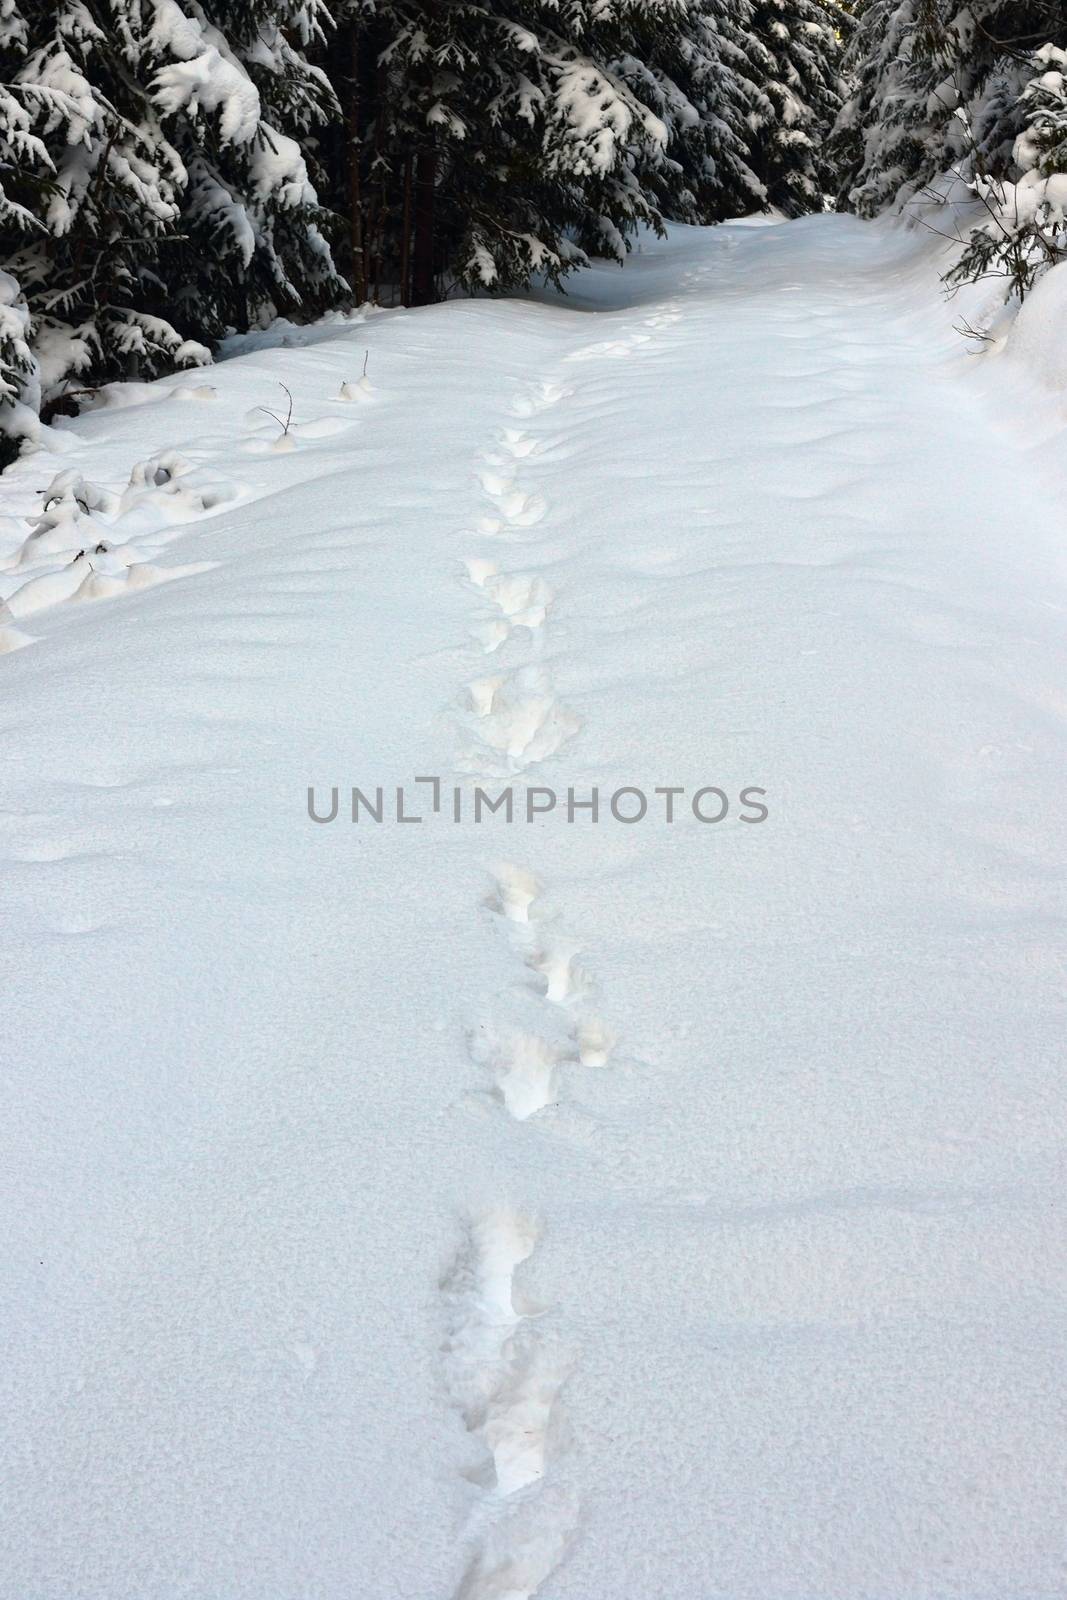 wild wolf tracks in big snow in Apuseni mountains, Romania, one of the last places with wild big carnivores in Europe